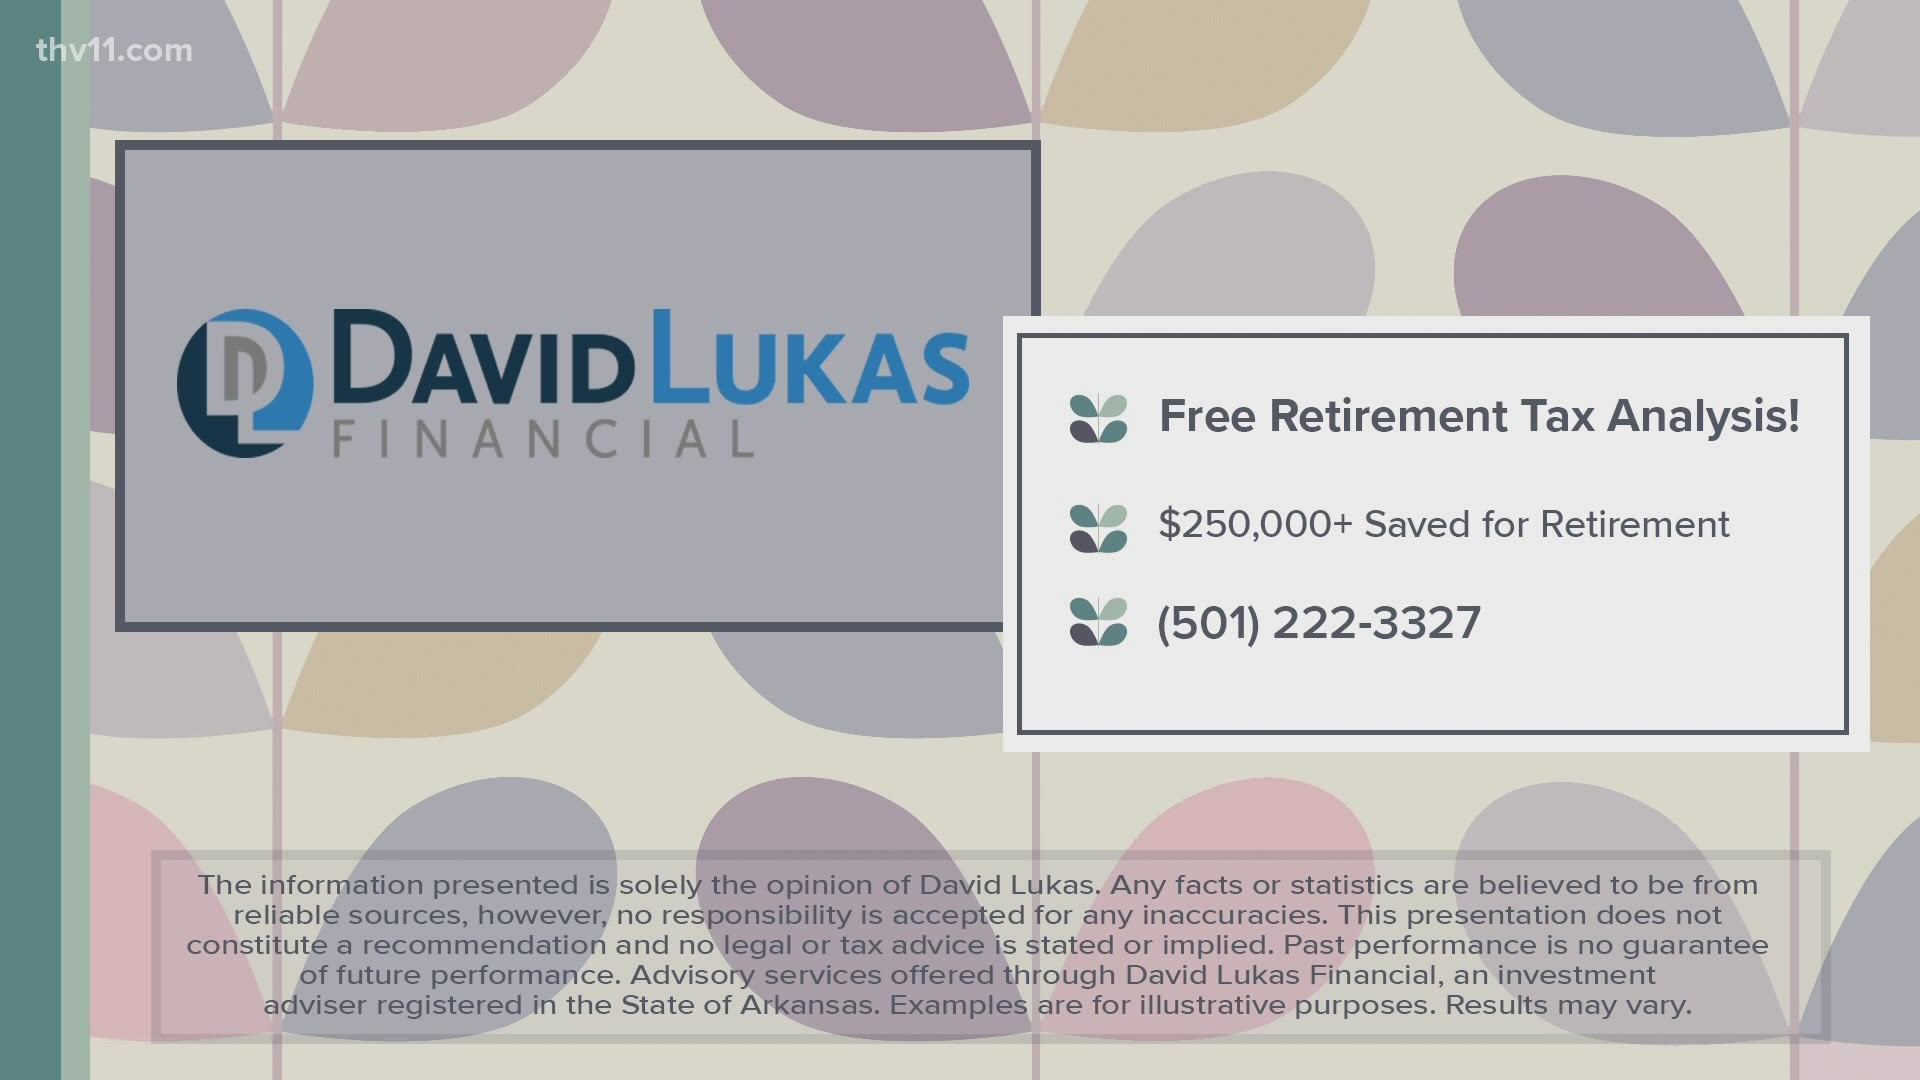 You could dramatically reduce or even eliminate your taxes in retirement with David Lukas Financials’ free retirement tax analysis.